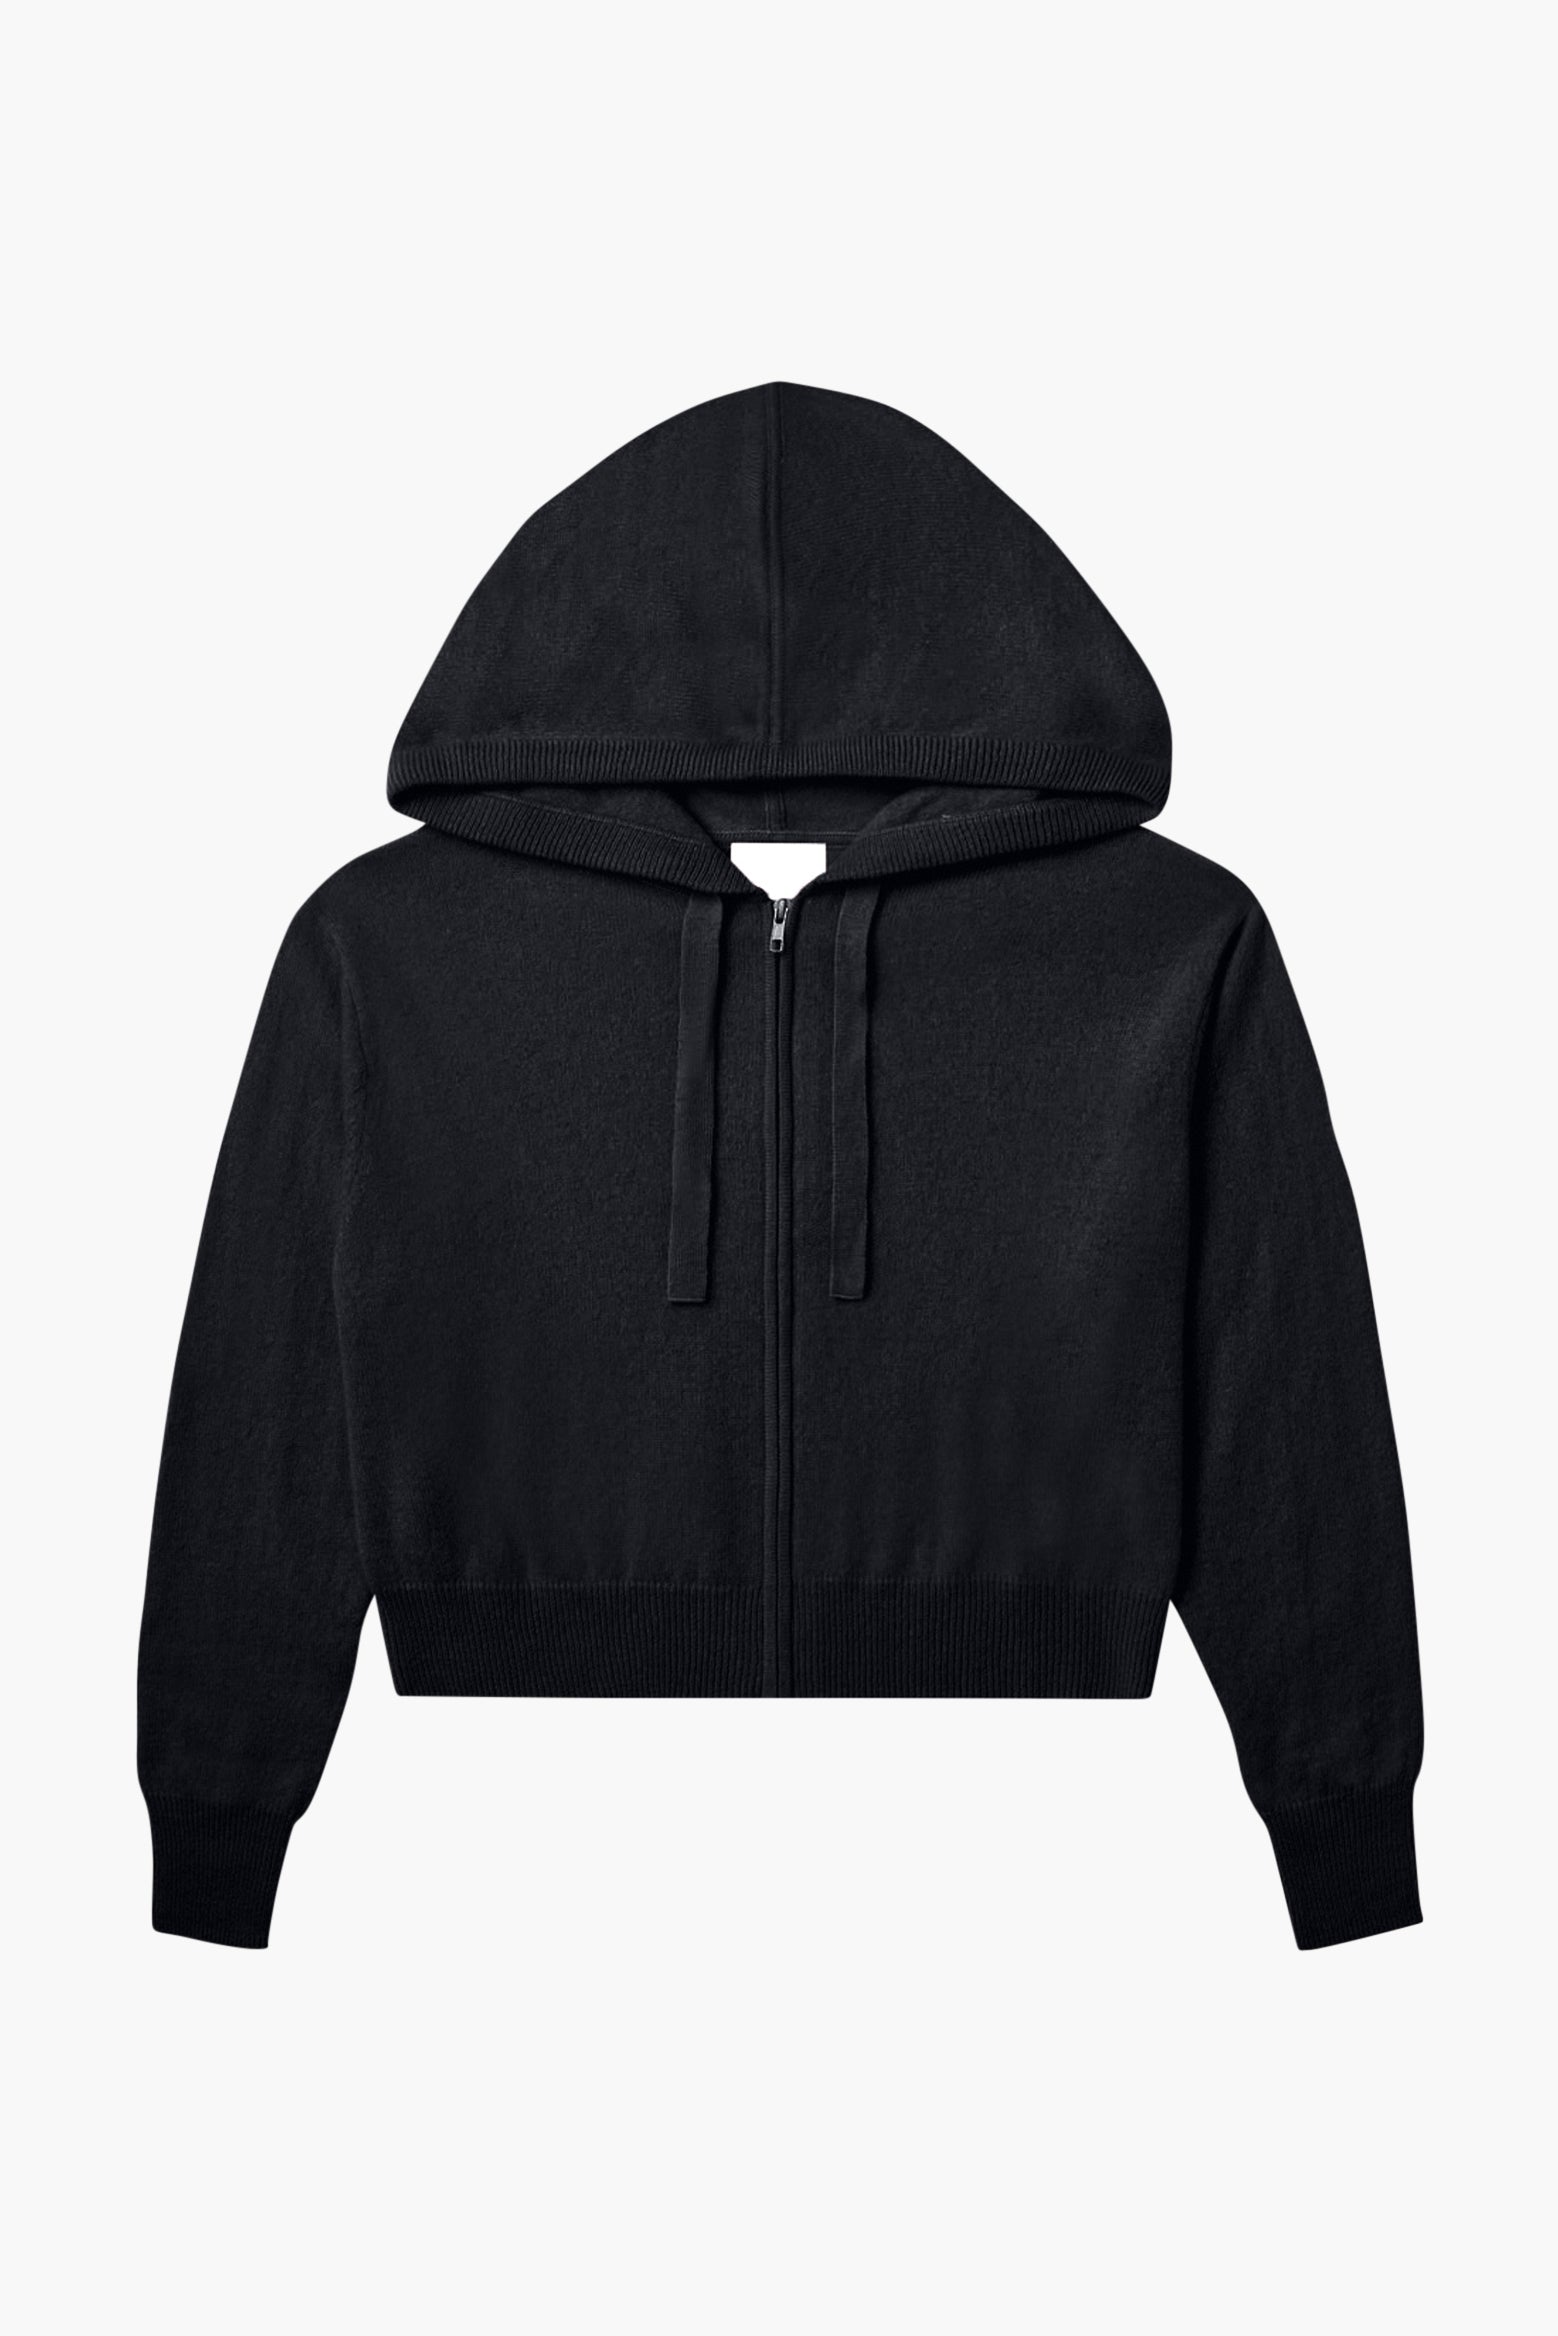 Crush Cashmere Elsie Zip Hoodie in Black available at TNT The New Trend Australia. Free shipping on orders over $300 AUD.